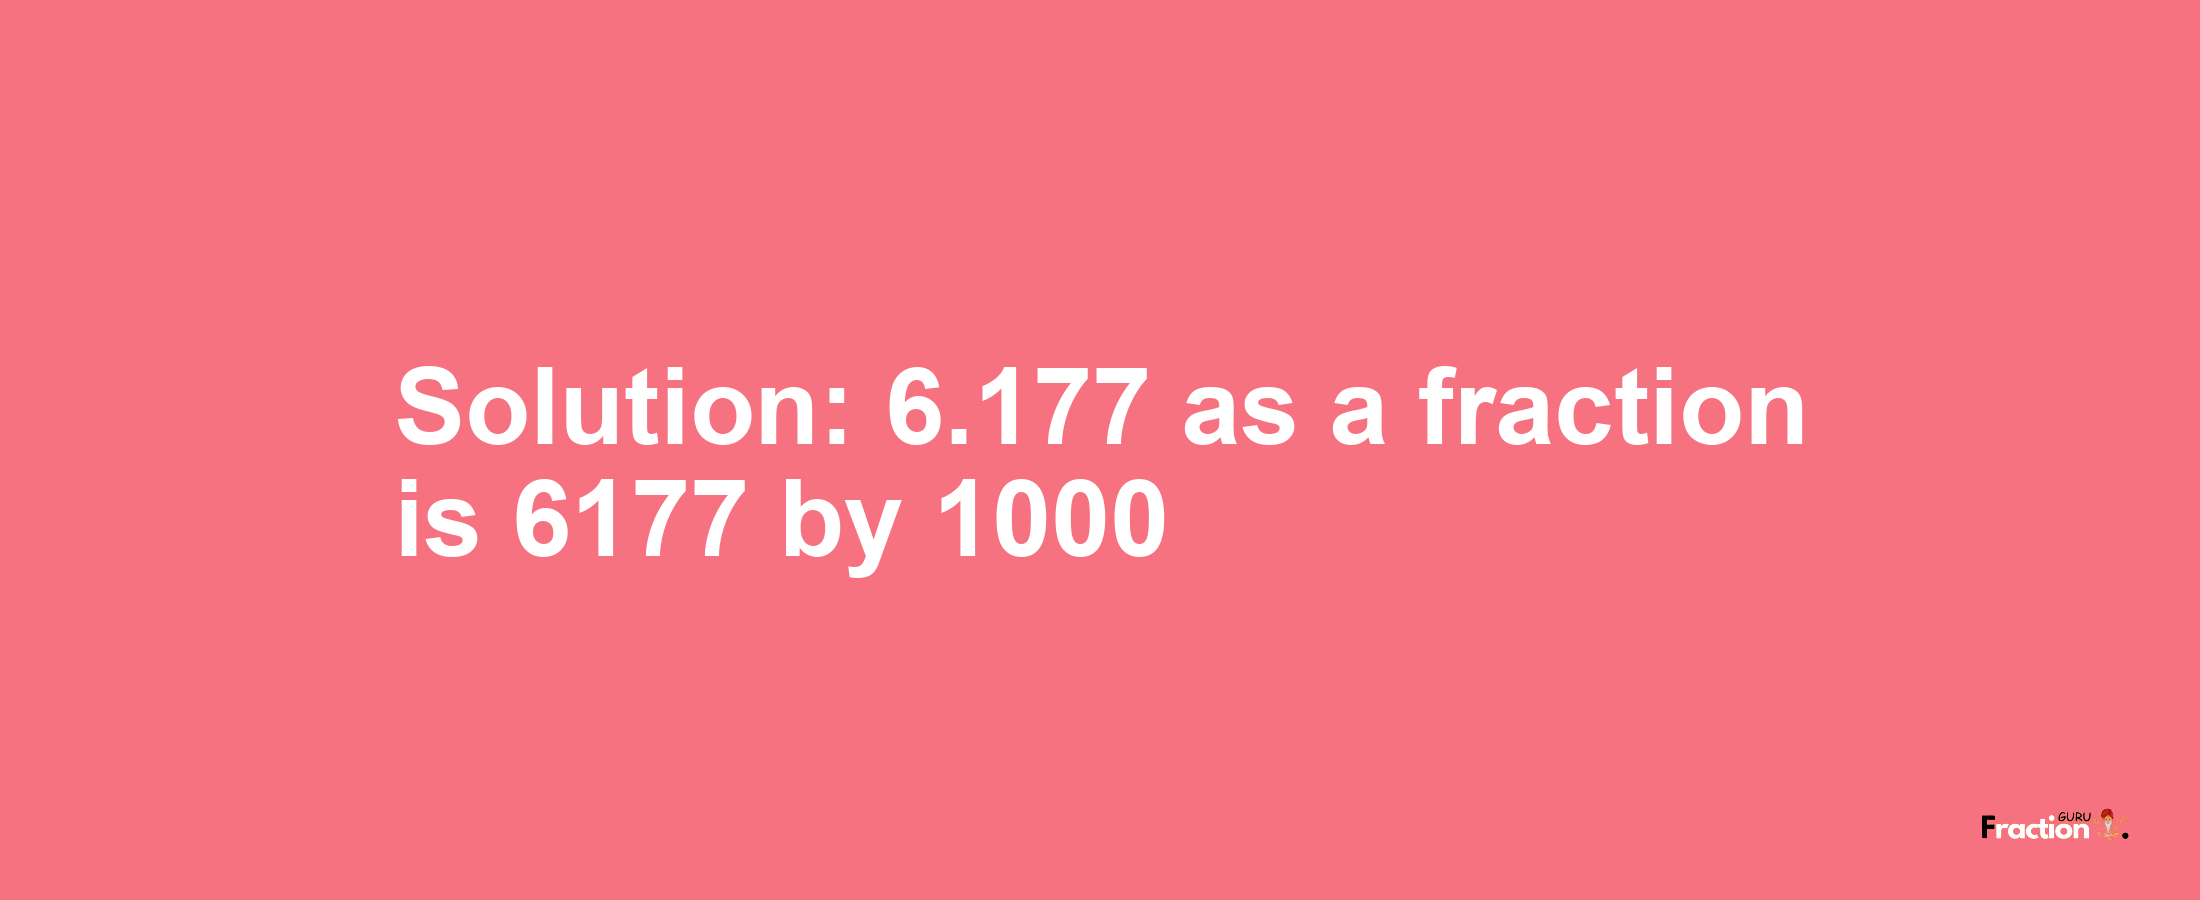 Solution:6.177 as a fraction is 6177/1000